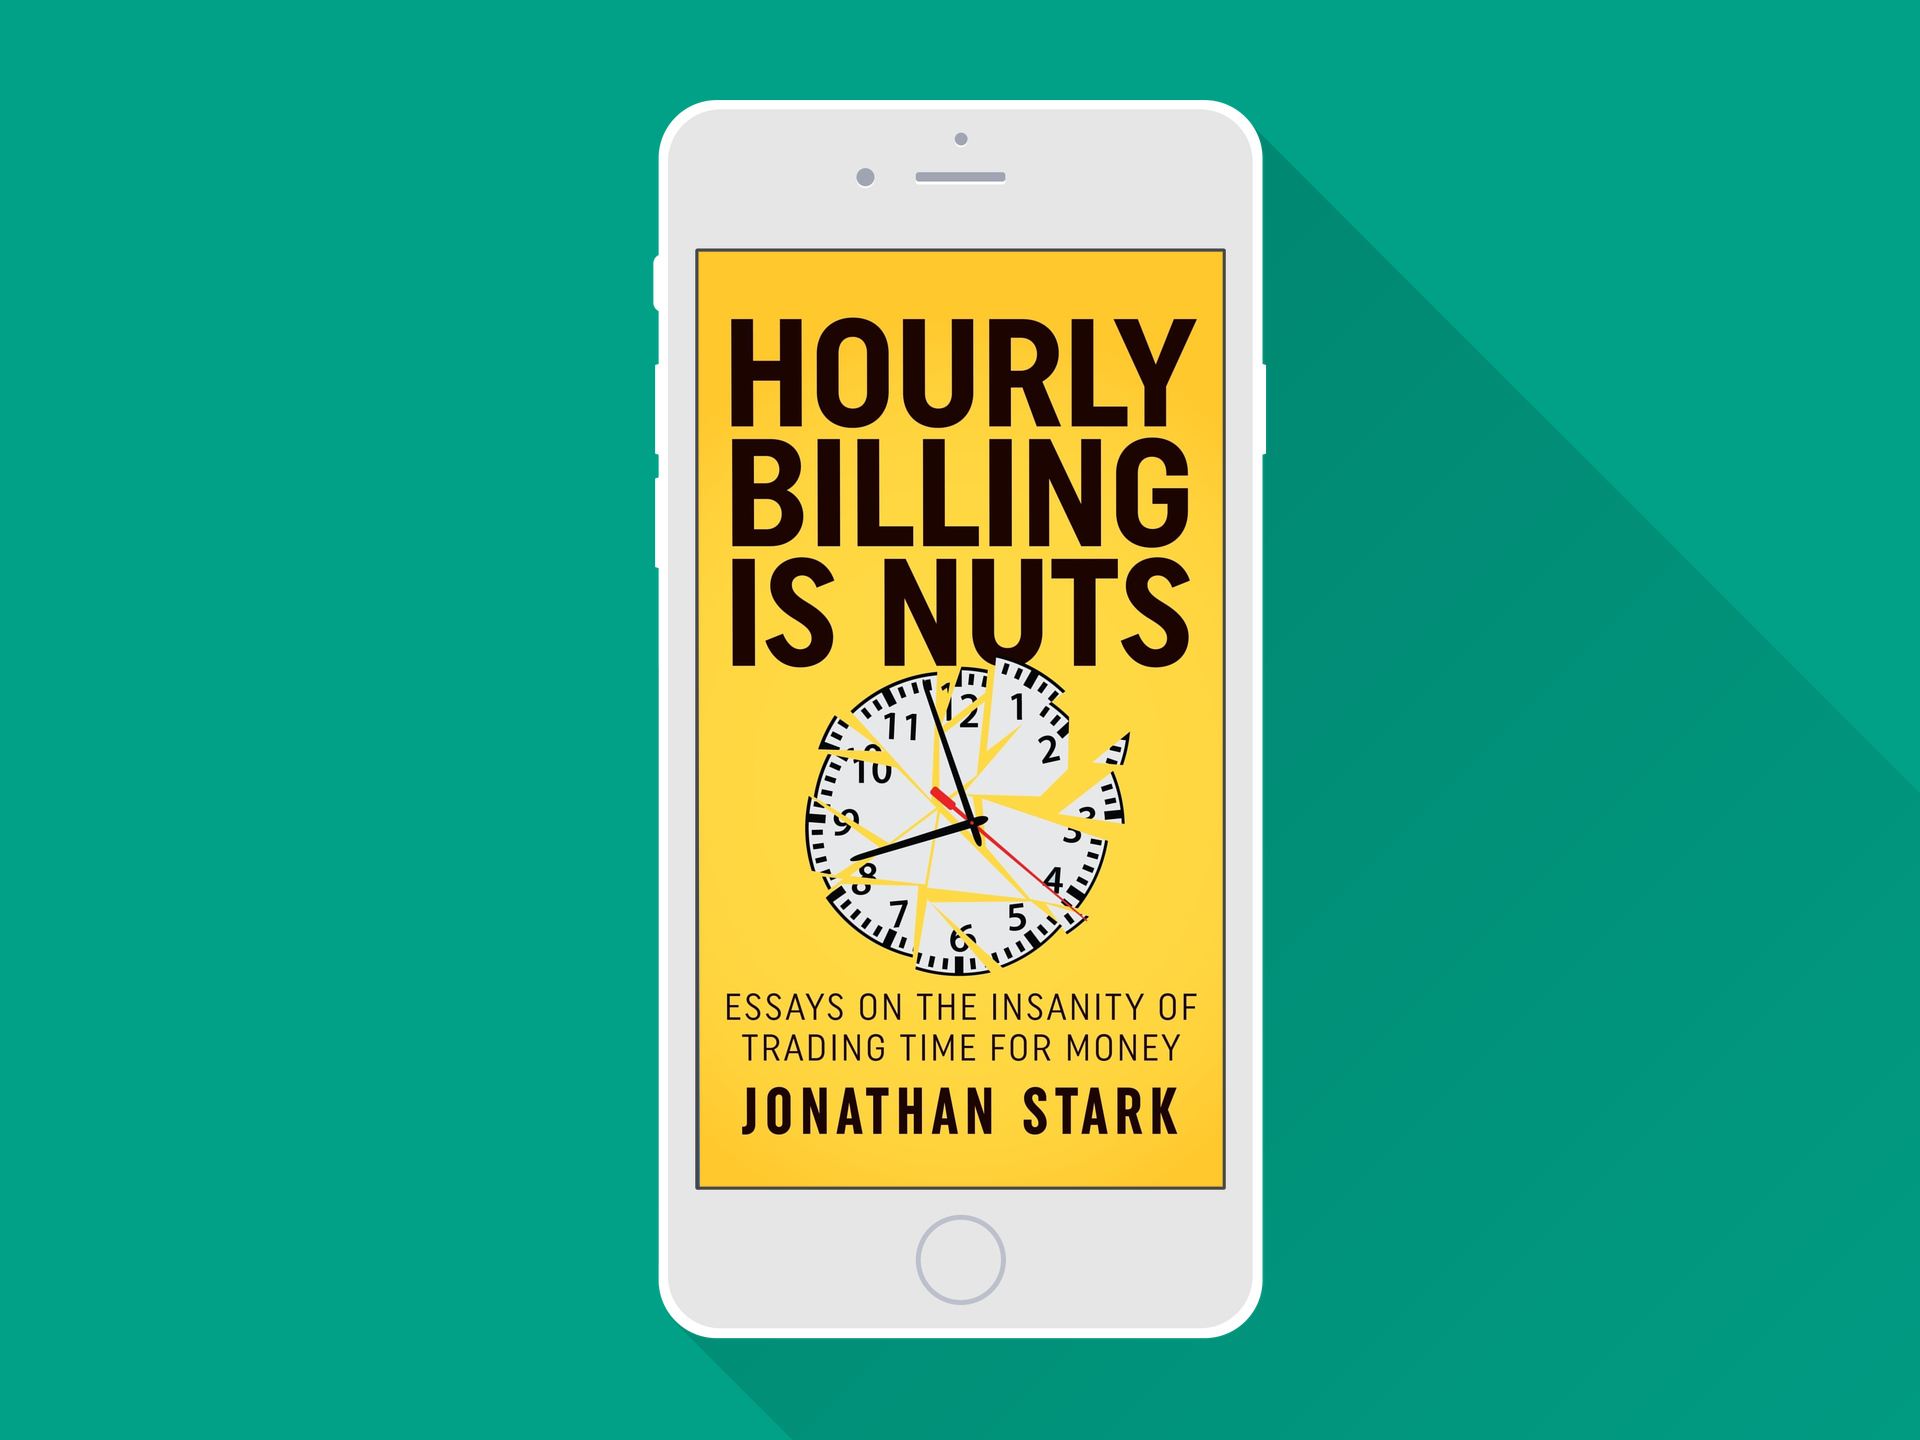 Hourly Billing Is Nuts book cover